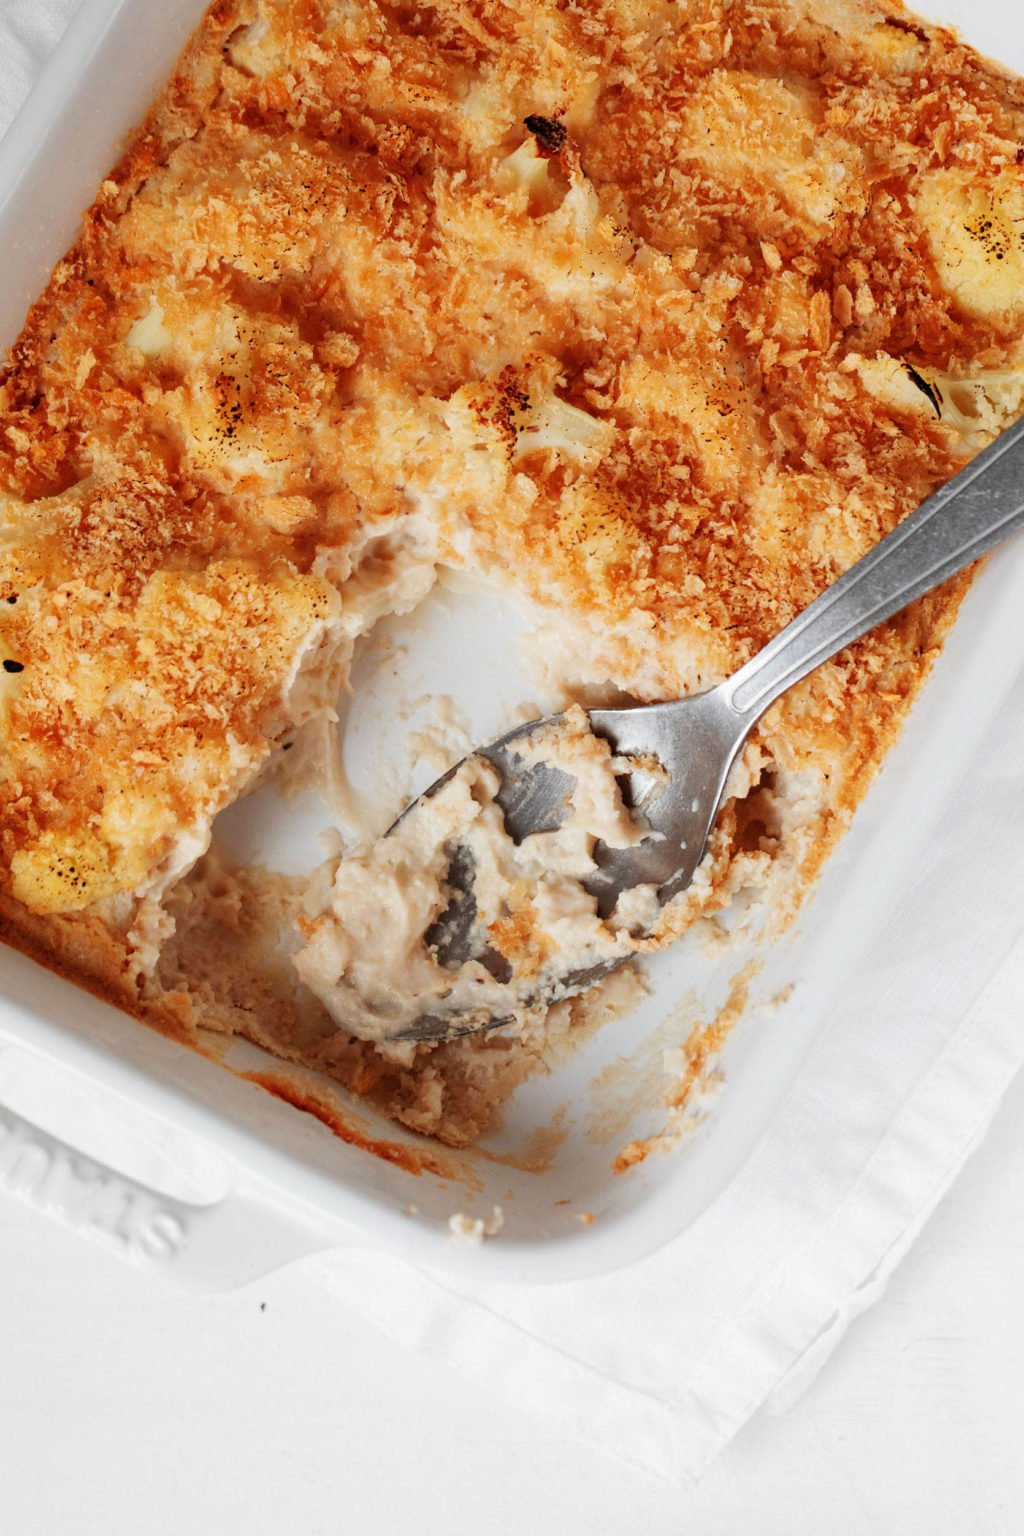 A baked casserole dish is held in a rectangular white pan. It's covered in bread crumbs and being served with a large, silver spoon.